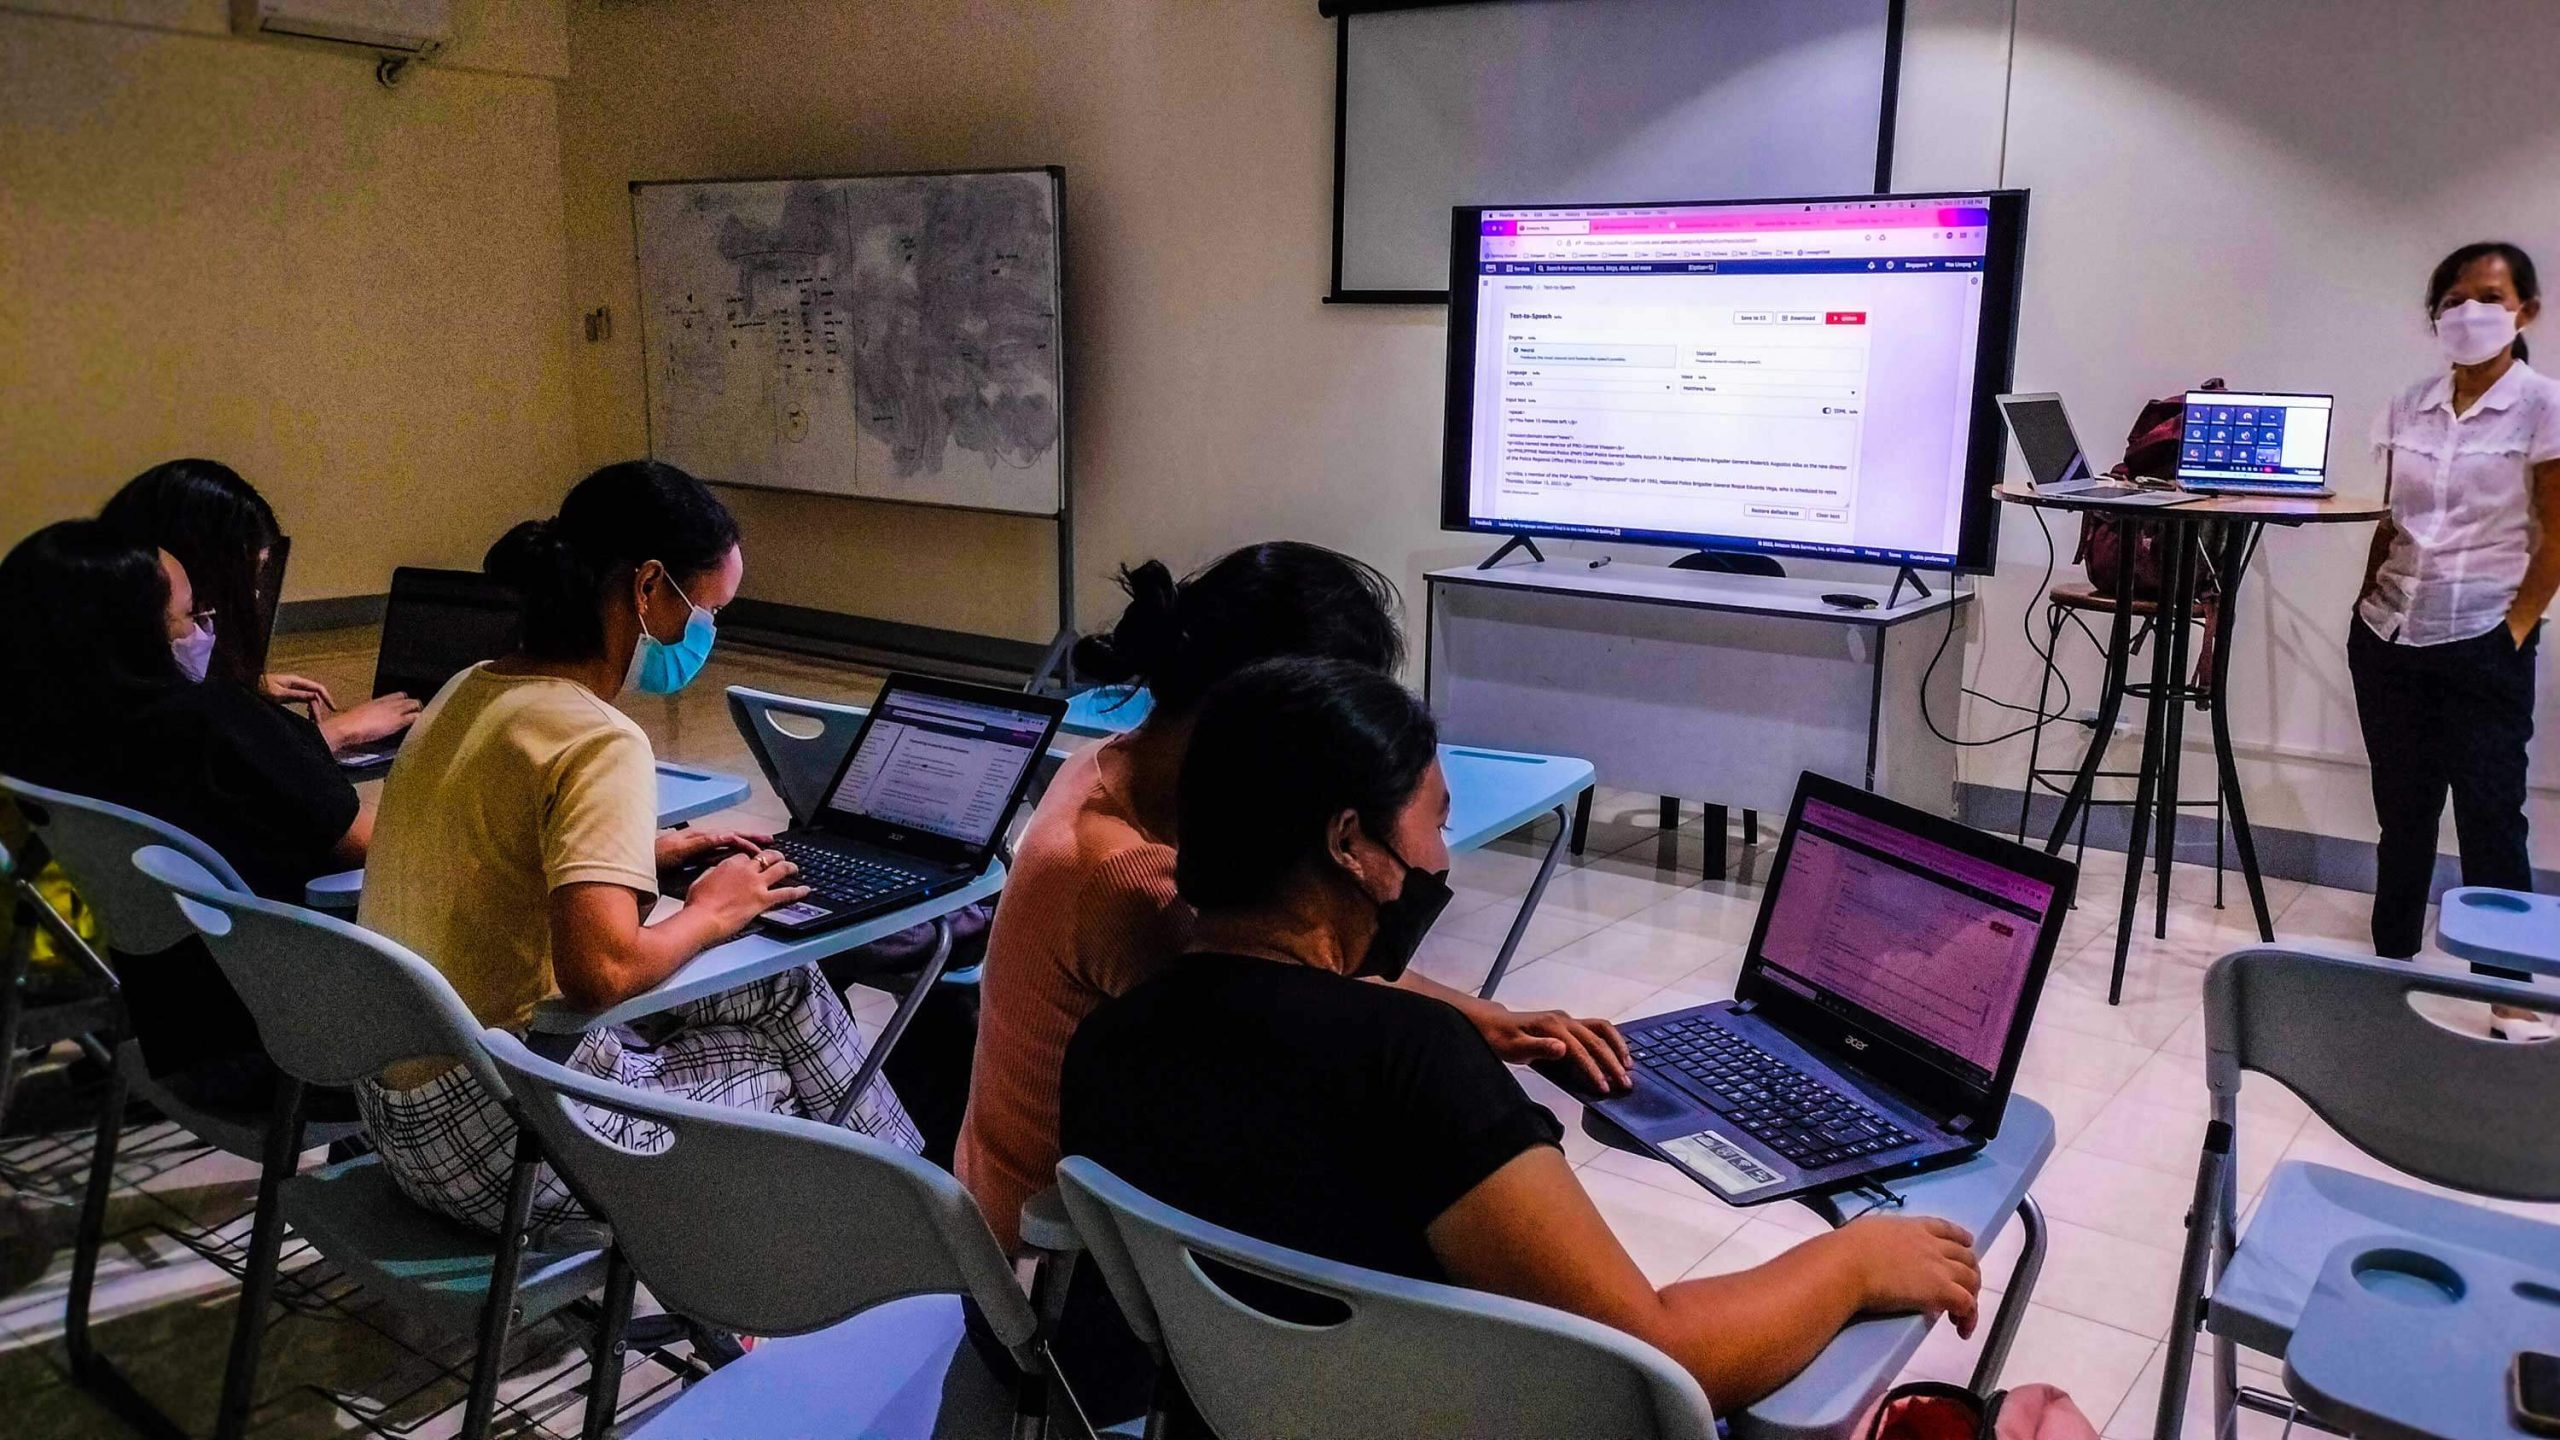 SSML. Students of New Media Platforms and Literacies with the College of Communication, Art and Design (CCAD) in UP Cebu use SSML and Amazon Polly to produce a news report.